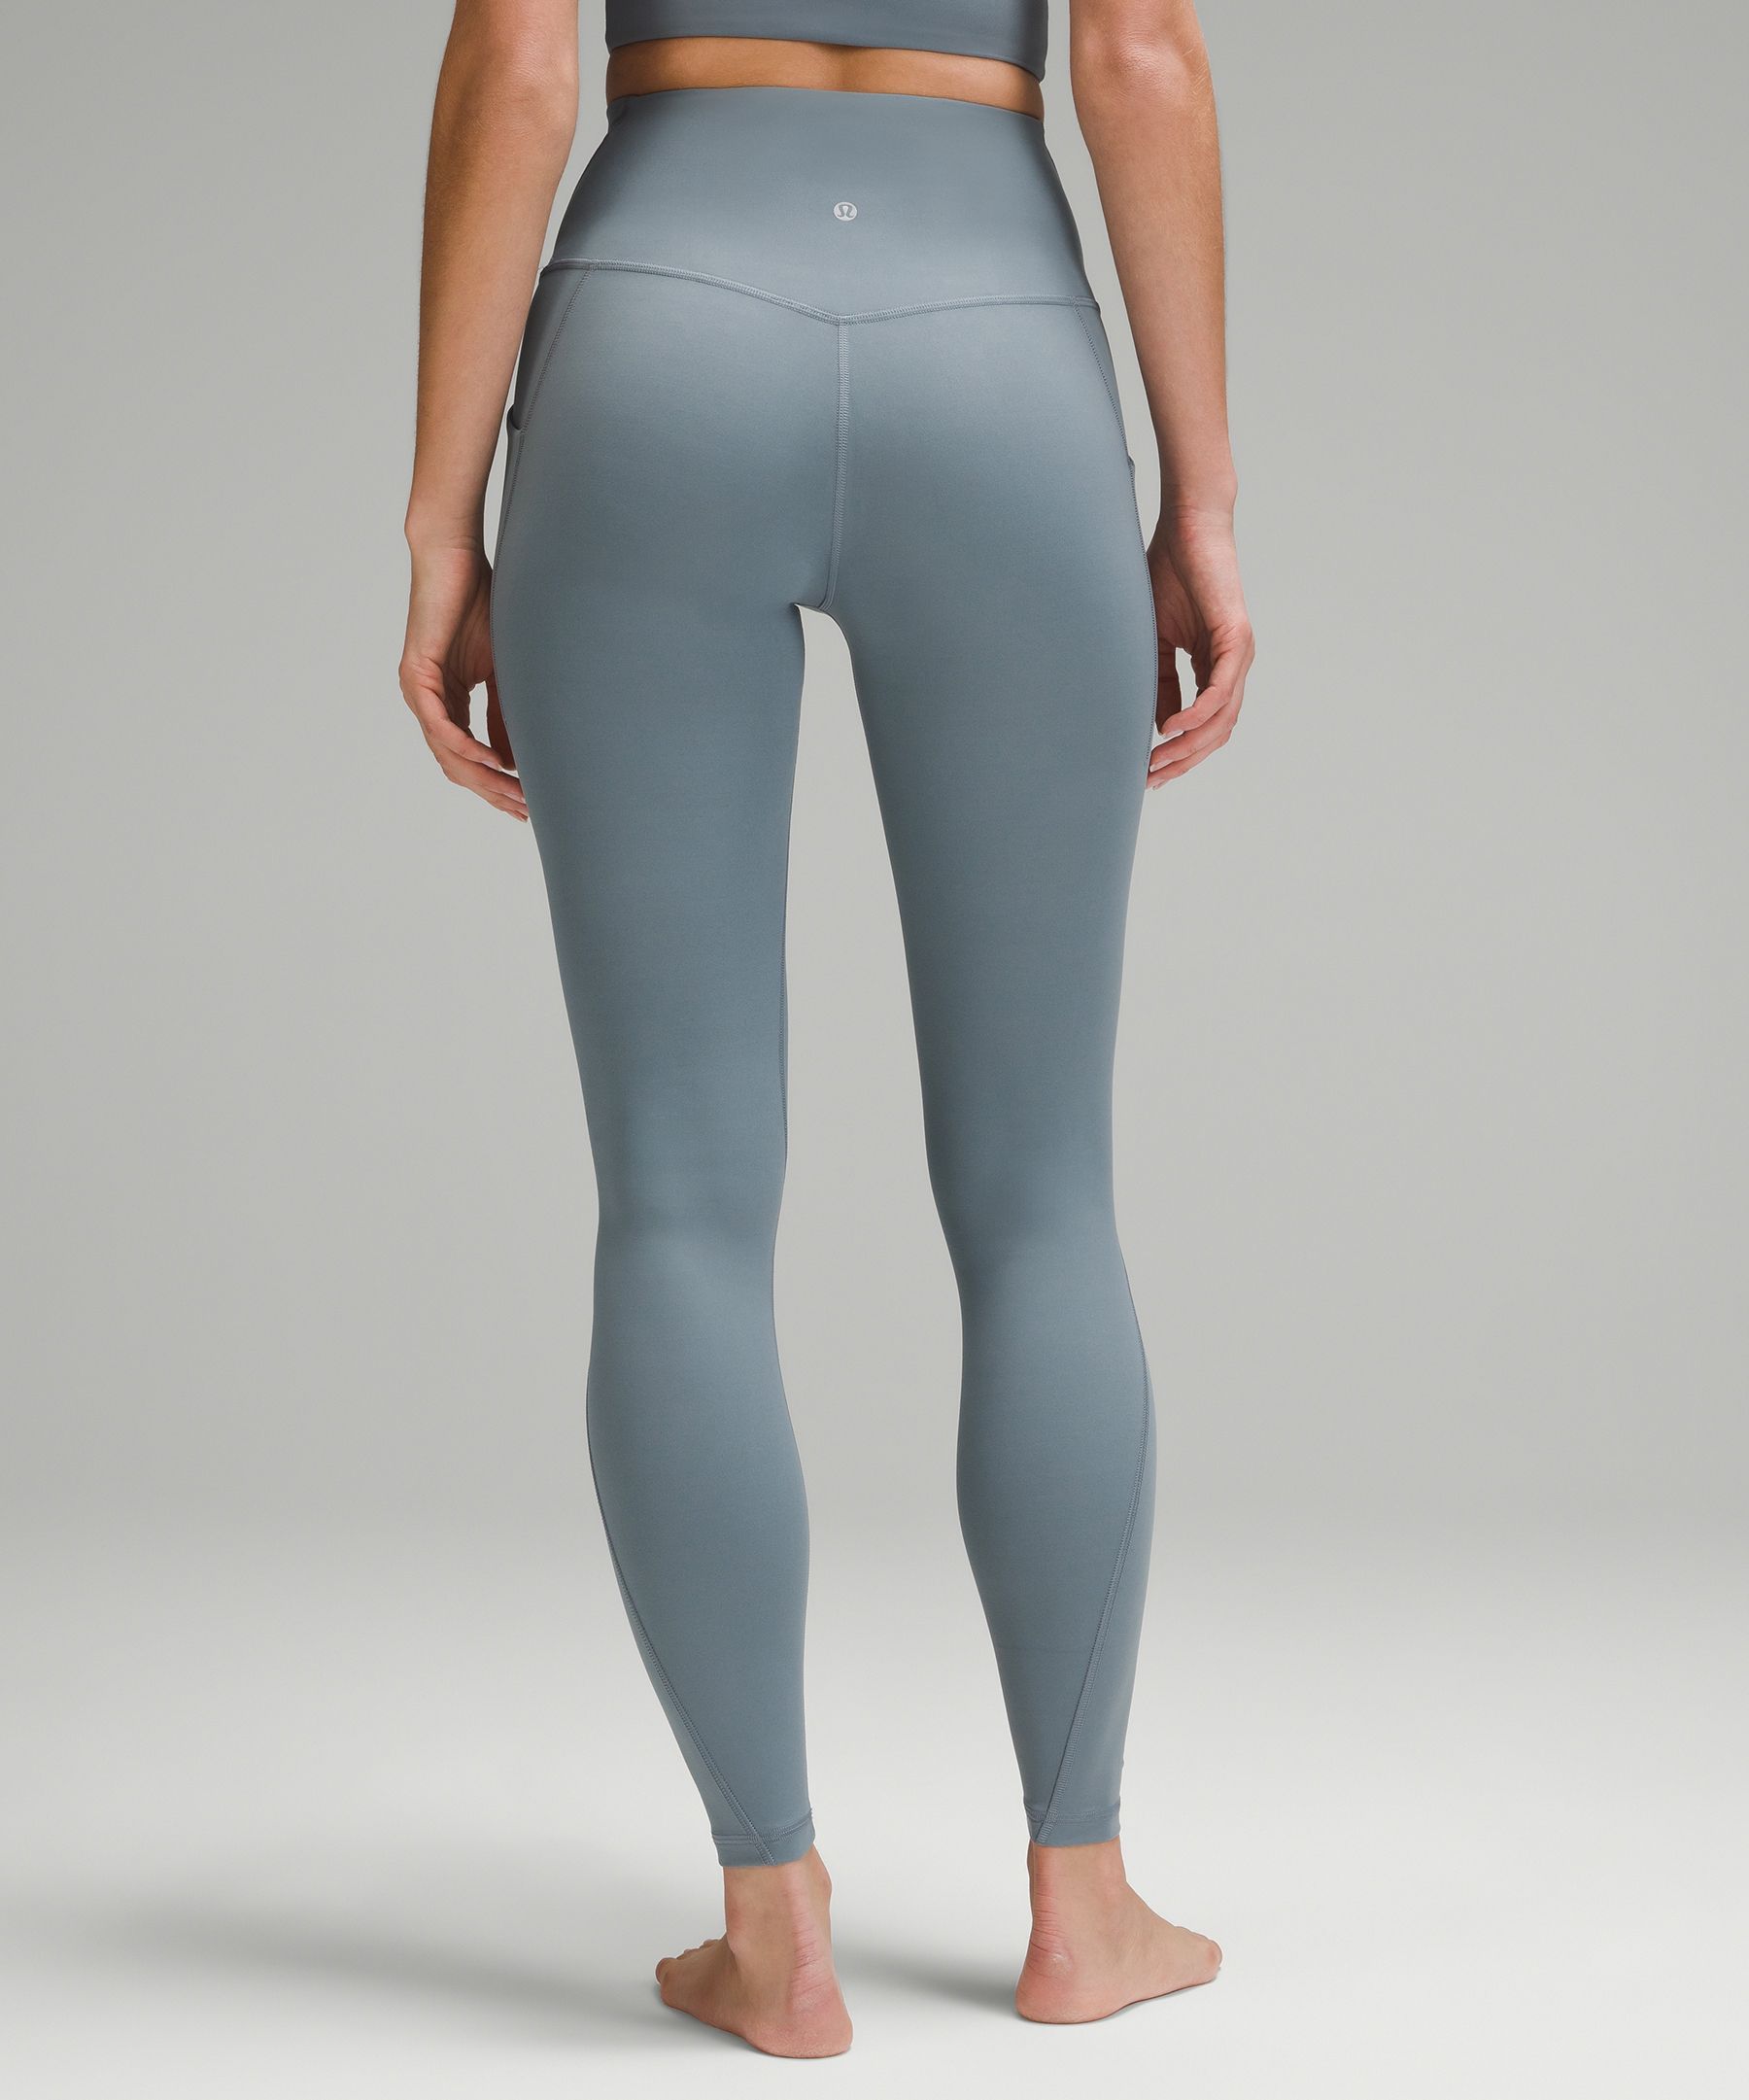 ALIGN PANT 28 - VIOLET VERBENA - Kinda wondering why these leggings that  I've been trying to get my hands on for almost 3 weeks now has completely  disappeared off the U.S.